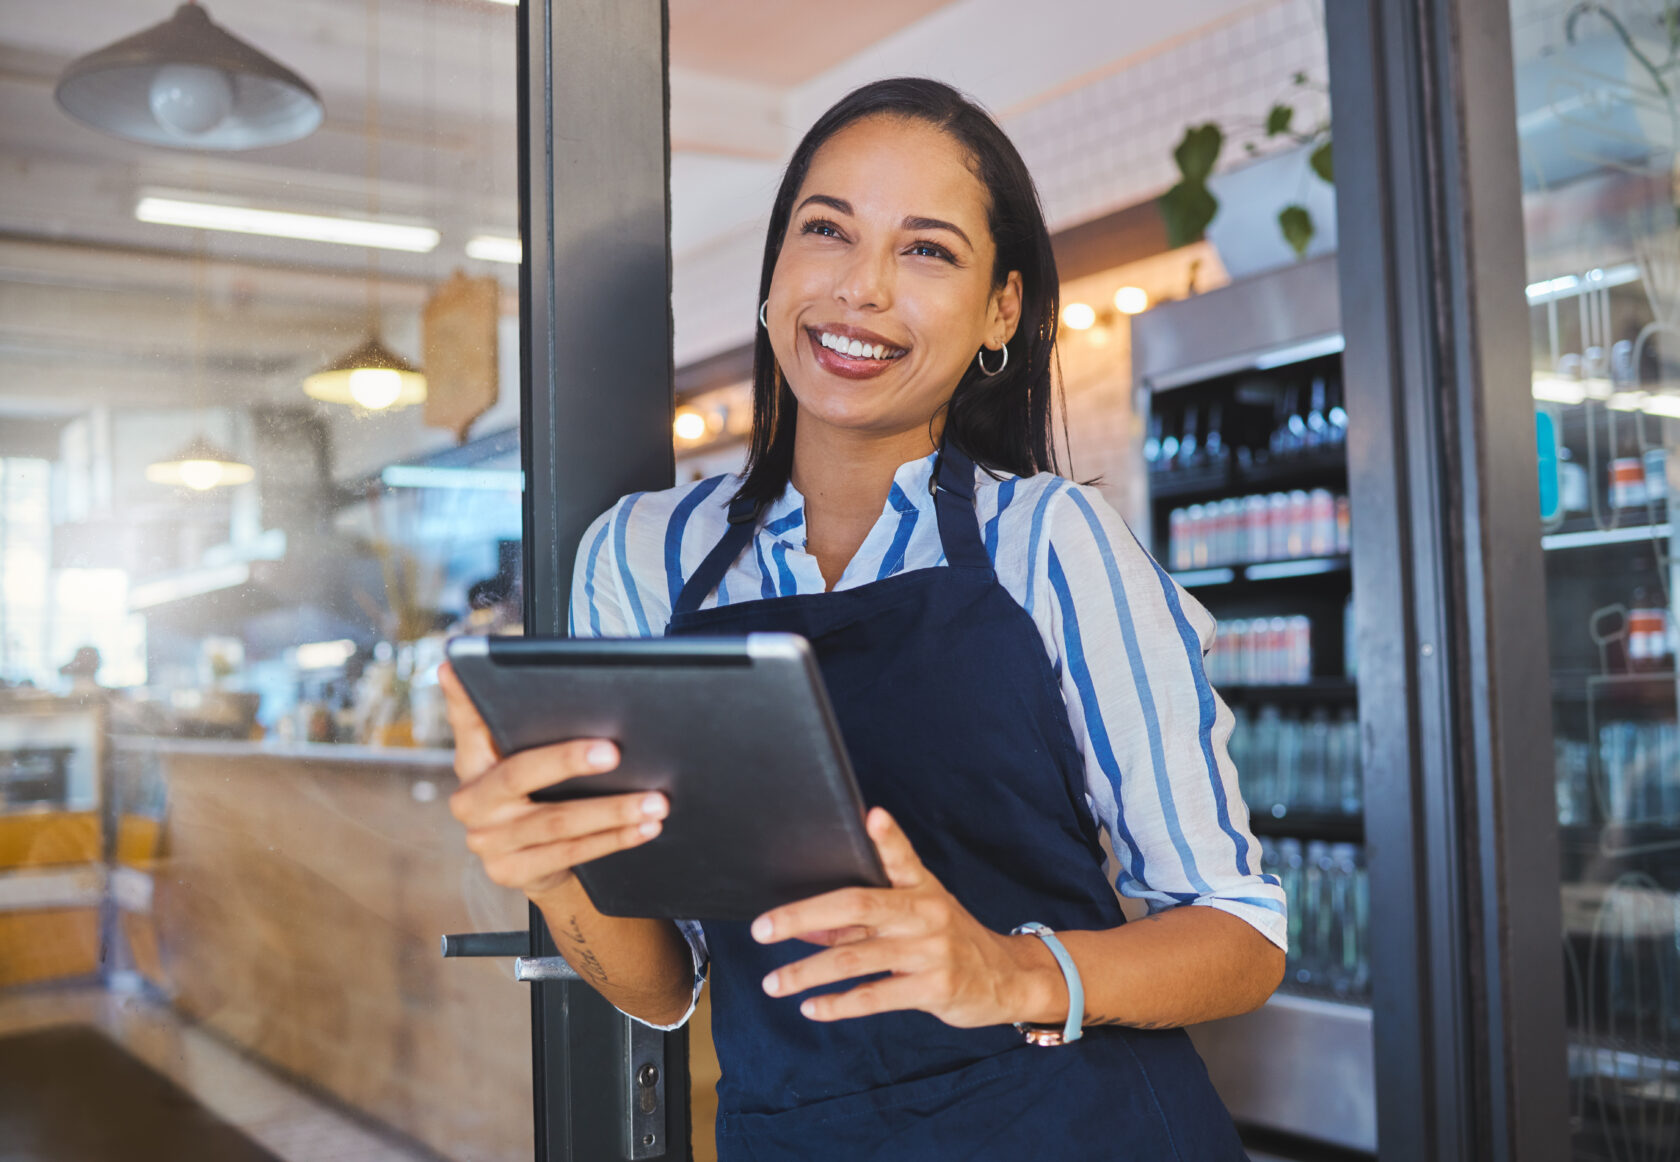 Startup, cafe and business woman in management with smile working on a digital tablet at the store Manager, coffee shop owner or worker of a small business at work in retail with technology